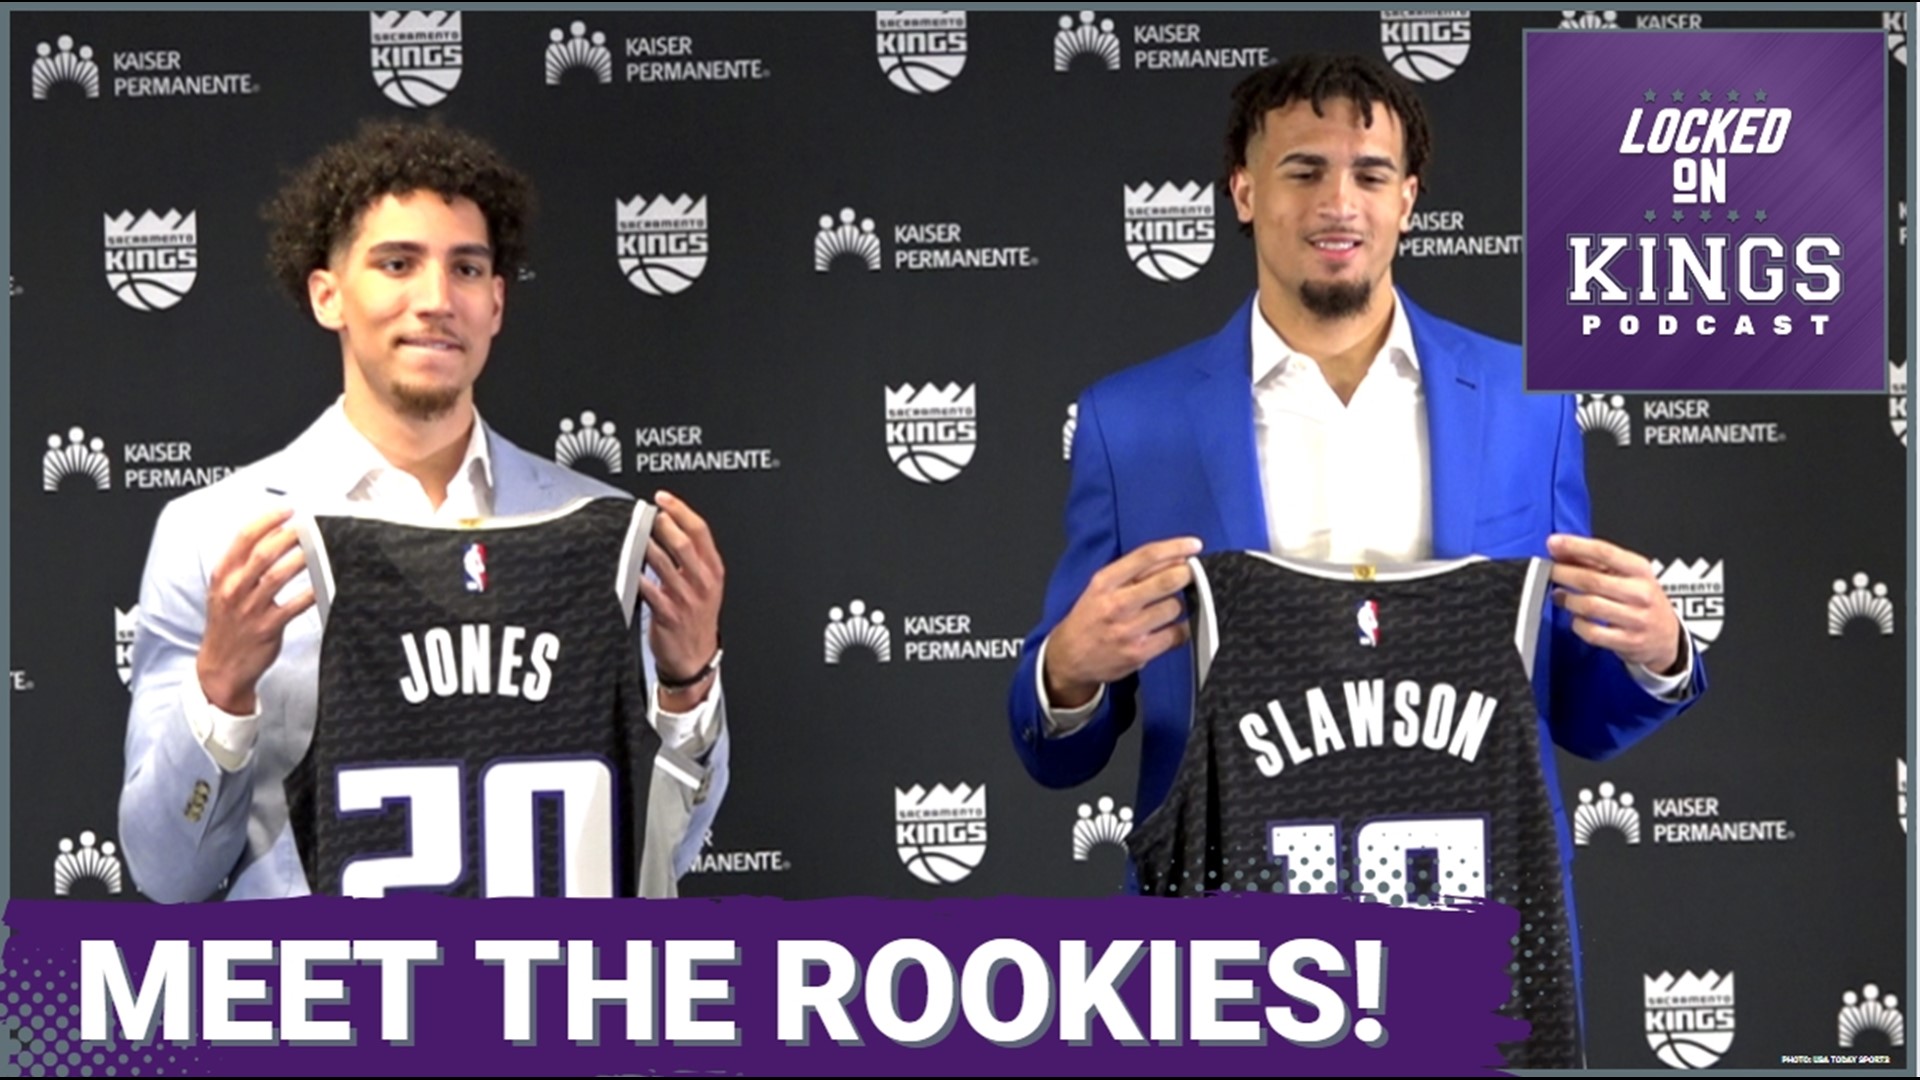 Matt George shares conversations with the two new Sacramento Kings rookies Colby Jones and Jalen Slawson after their introductory press conferences Tuesday morning.